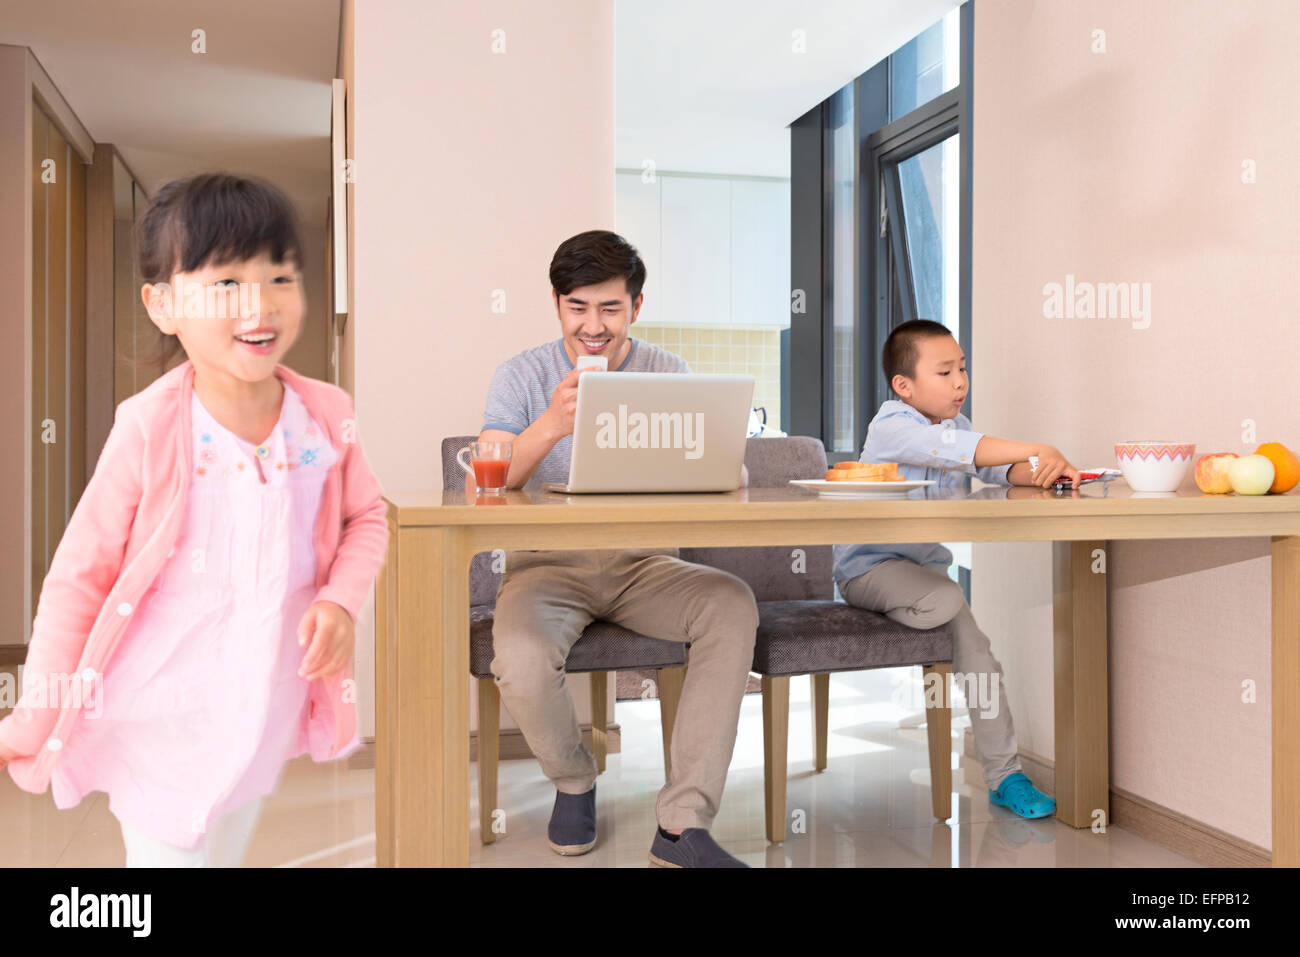 Father working at home with children Stock Photo